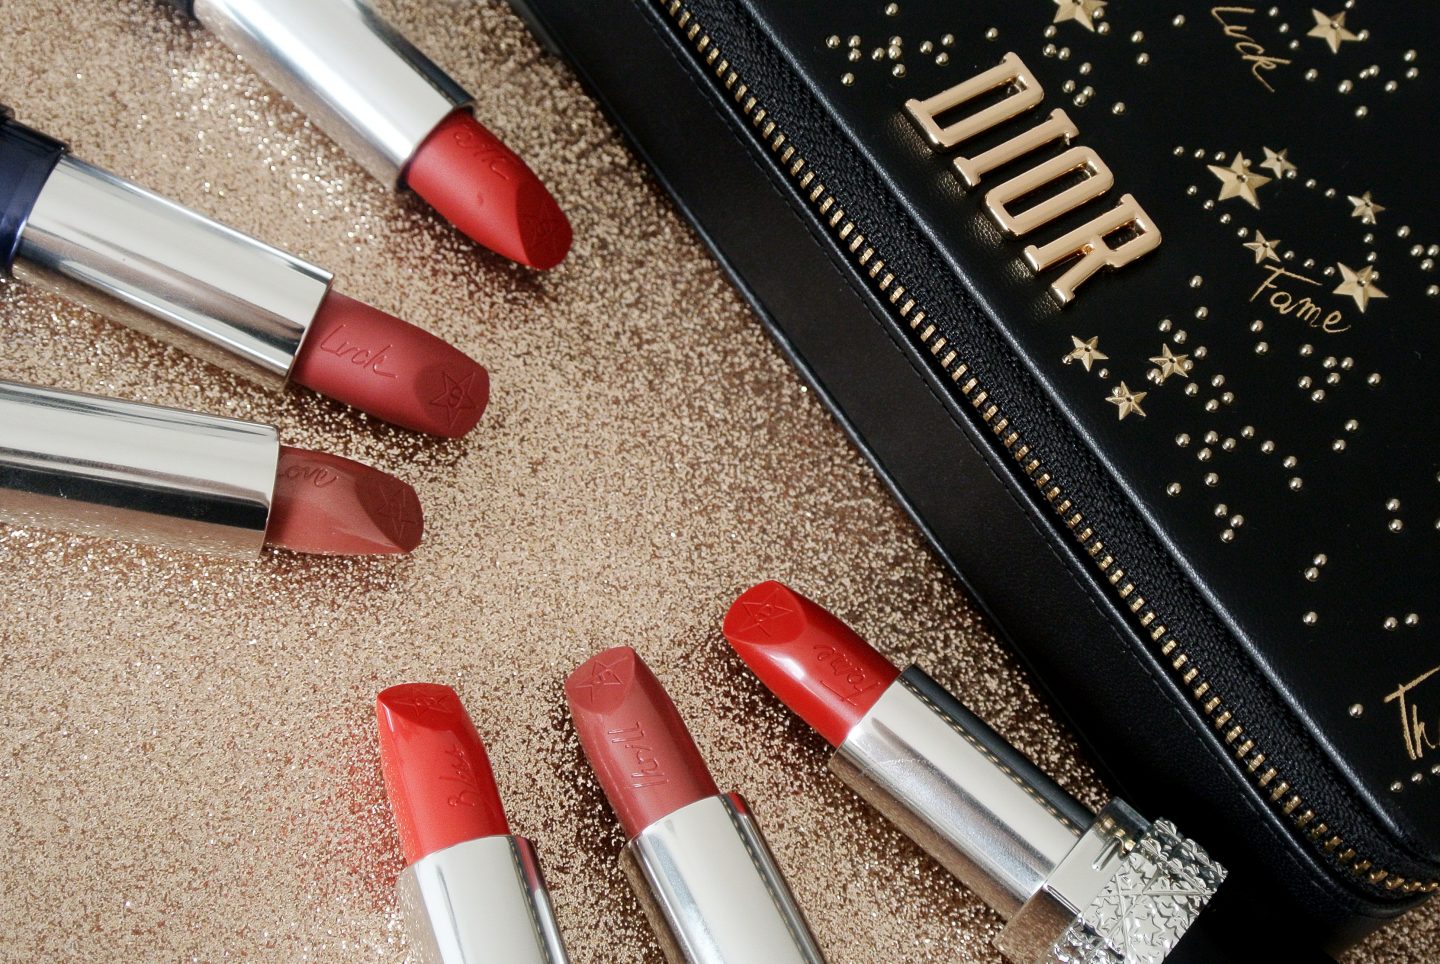 dior midnight wish rouge dior couture collection gift set